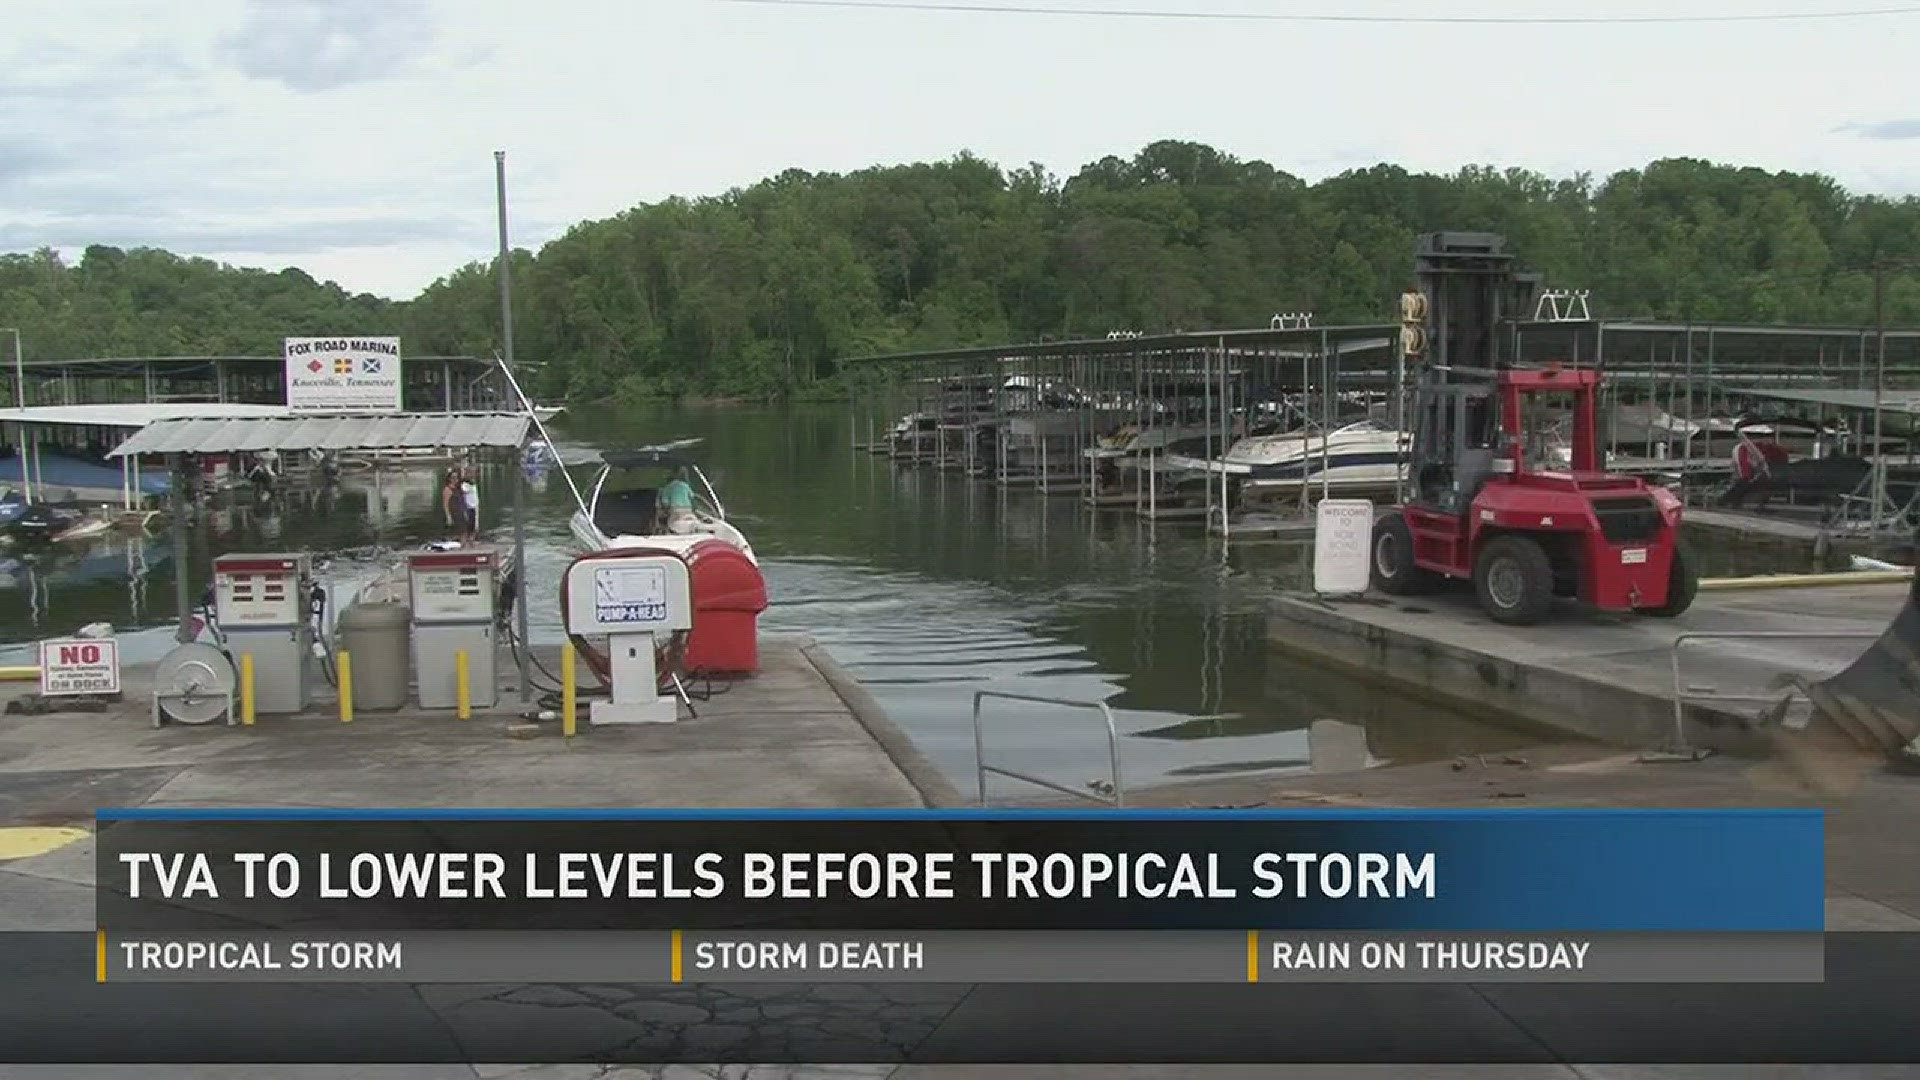 June 21, 2017: Tropical Storm Cindy is expected to drop heavy rain across East tennessee, and TVA is preparing to lower lake levels on nine dams.